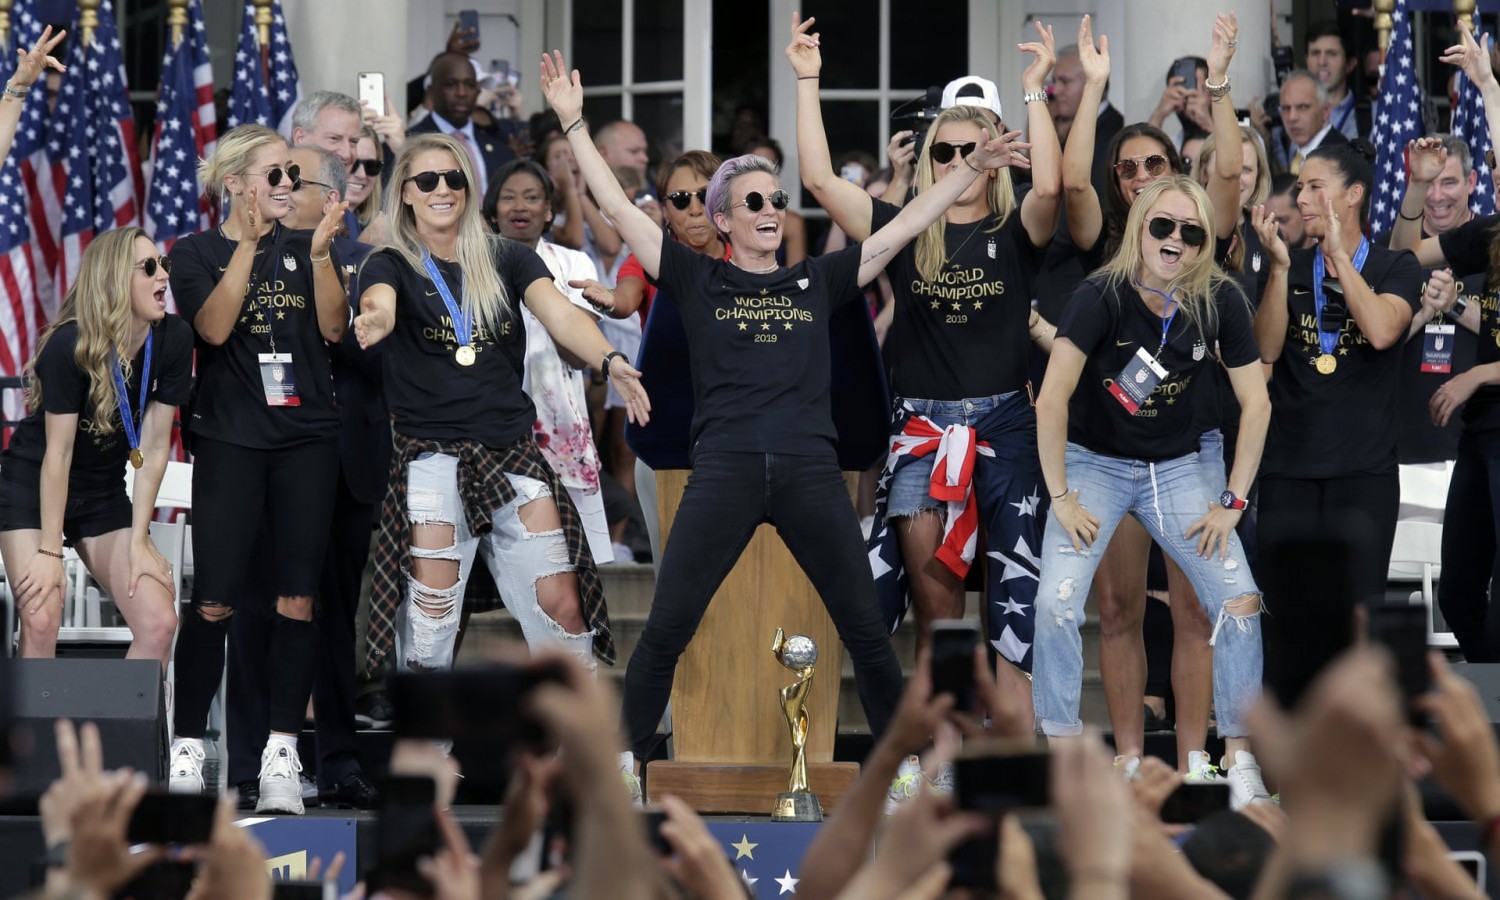 The US women’s soccer team, with Megan Rapinoe, at center, celebrates at City Hall after the ticker tape parade. Photograph: Seth Wenig/AP